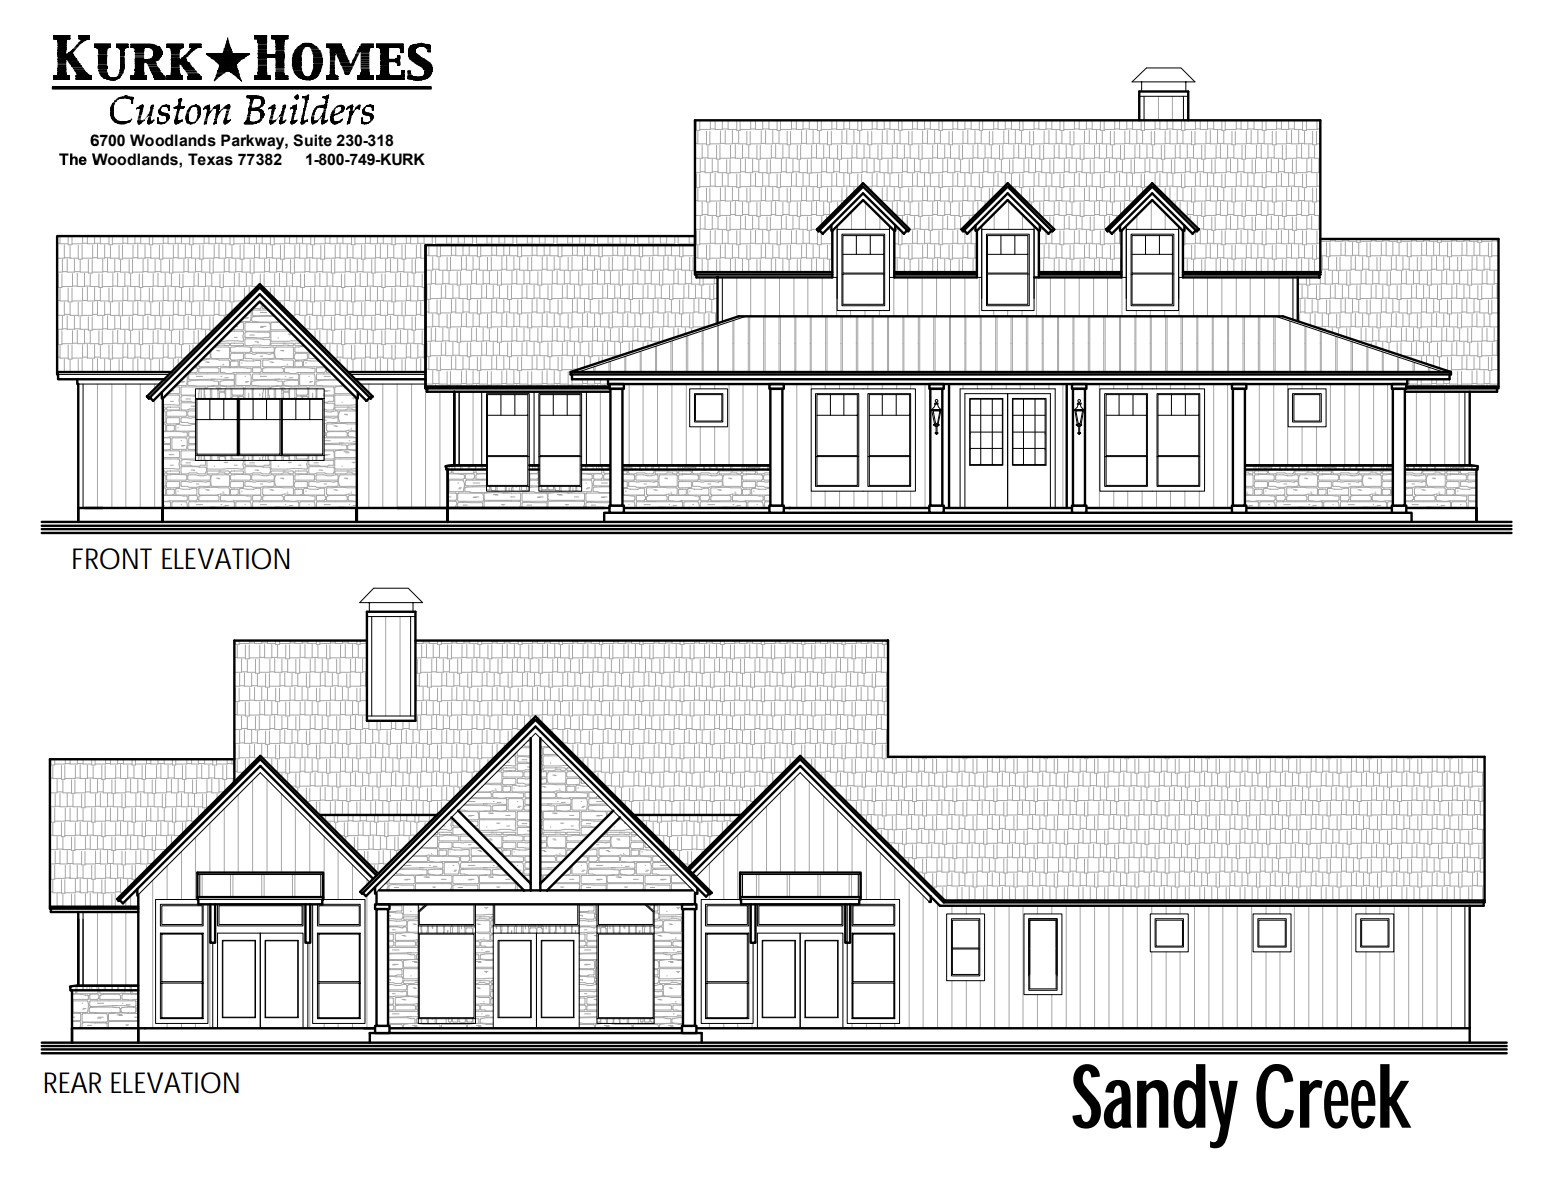 The Sandy Creek - Front Elevation